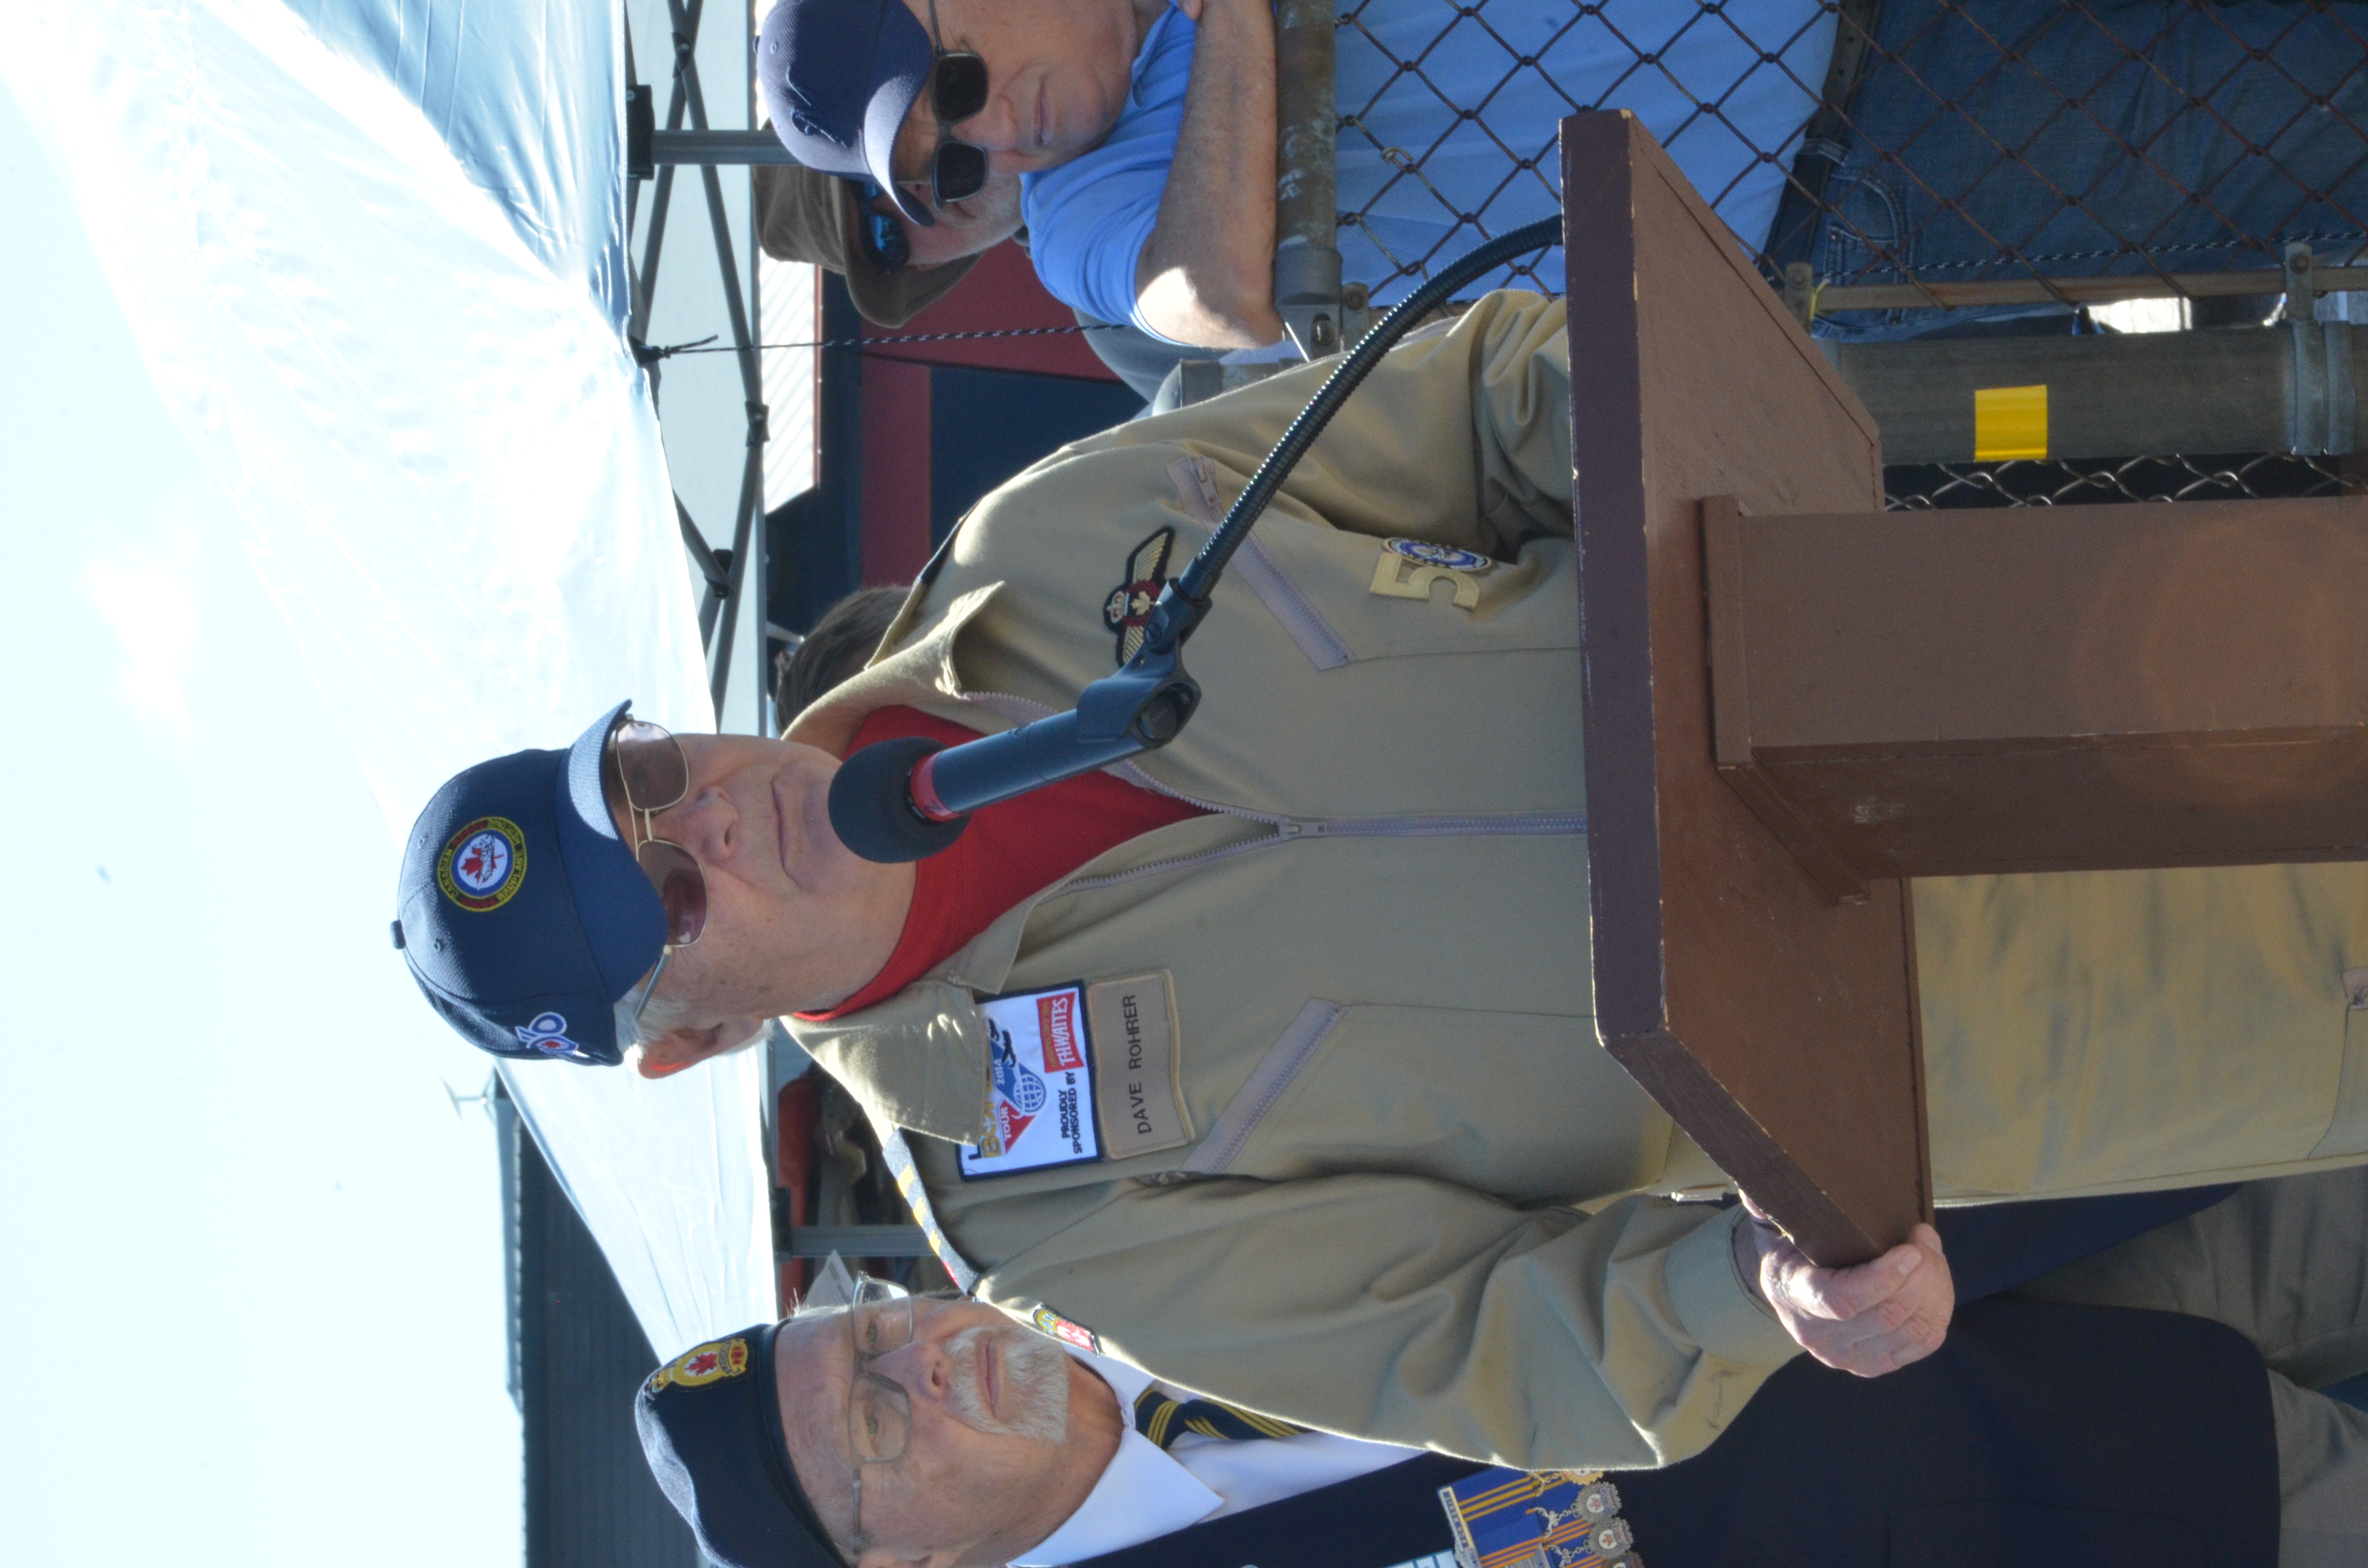 Dave Rohrer, President and CEO of Canadian Warplane Heritage and pilot of the Lancaster addresses the crowd. While there were many dignitaries speaking, most of the speeches were short and to the point.